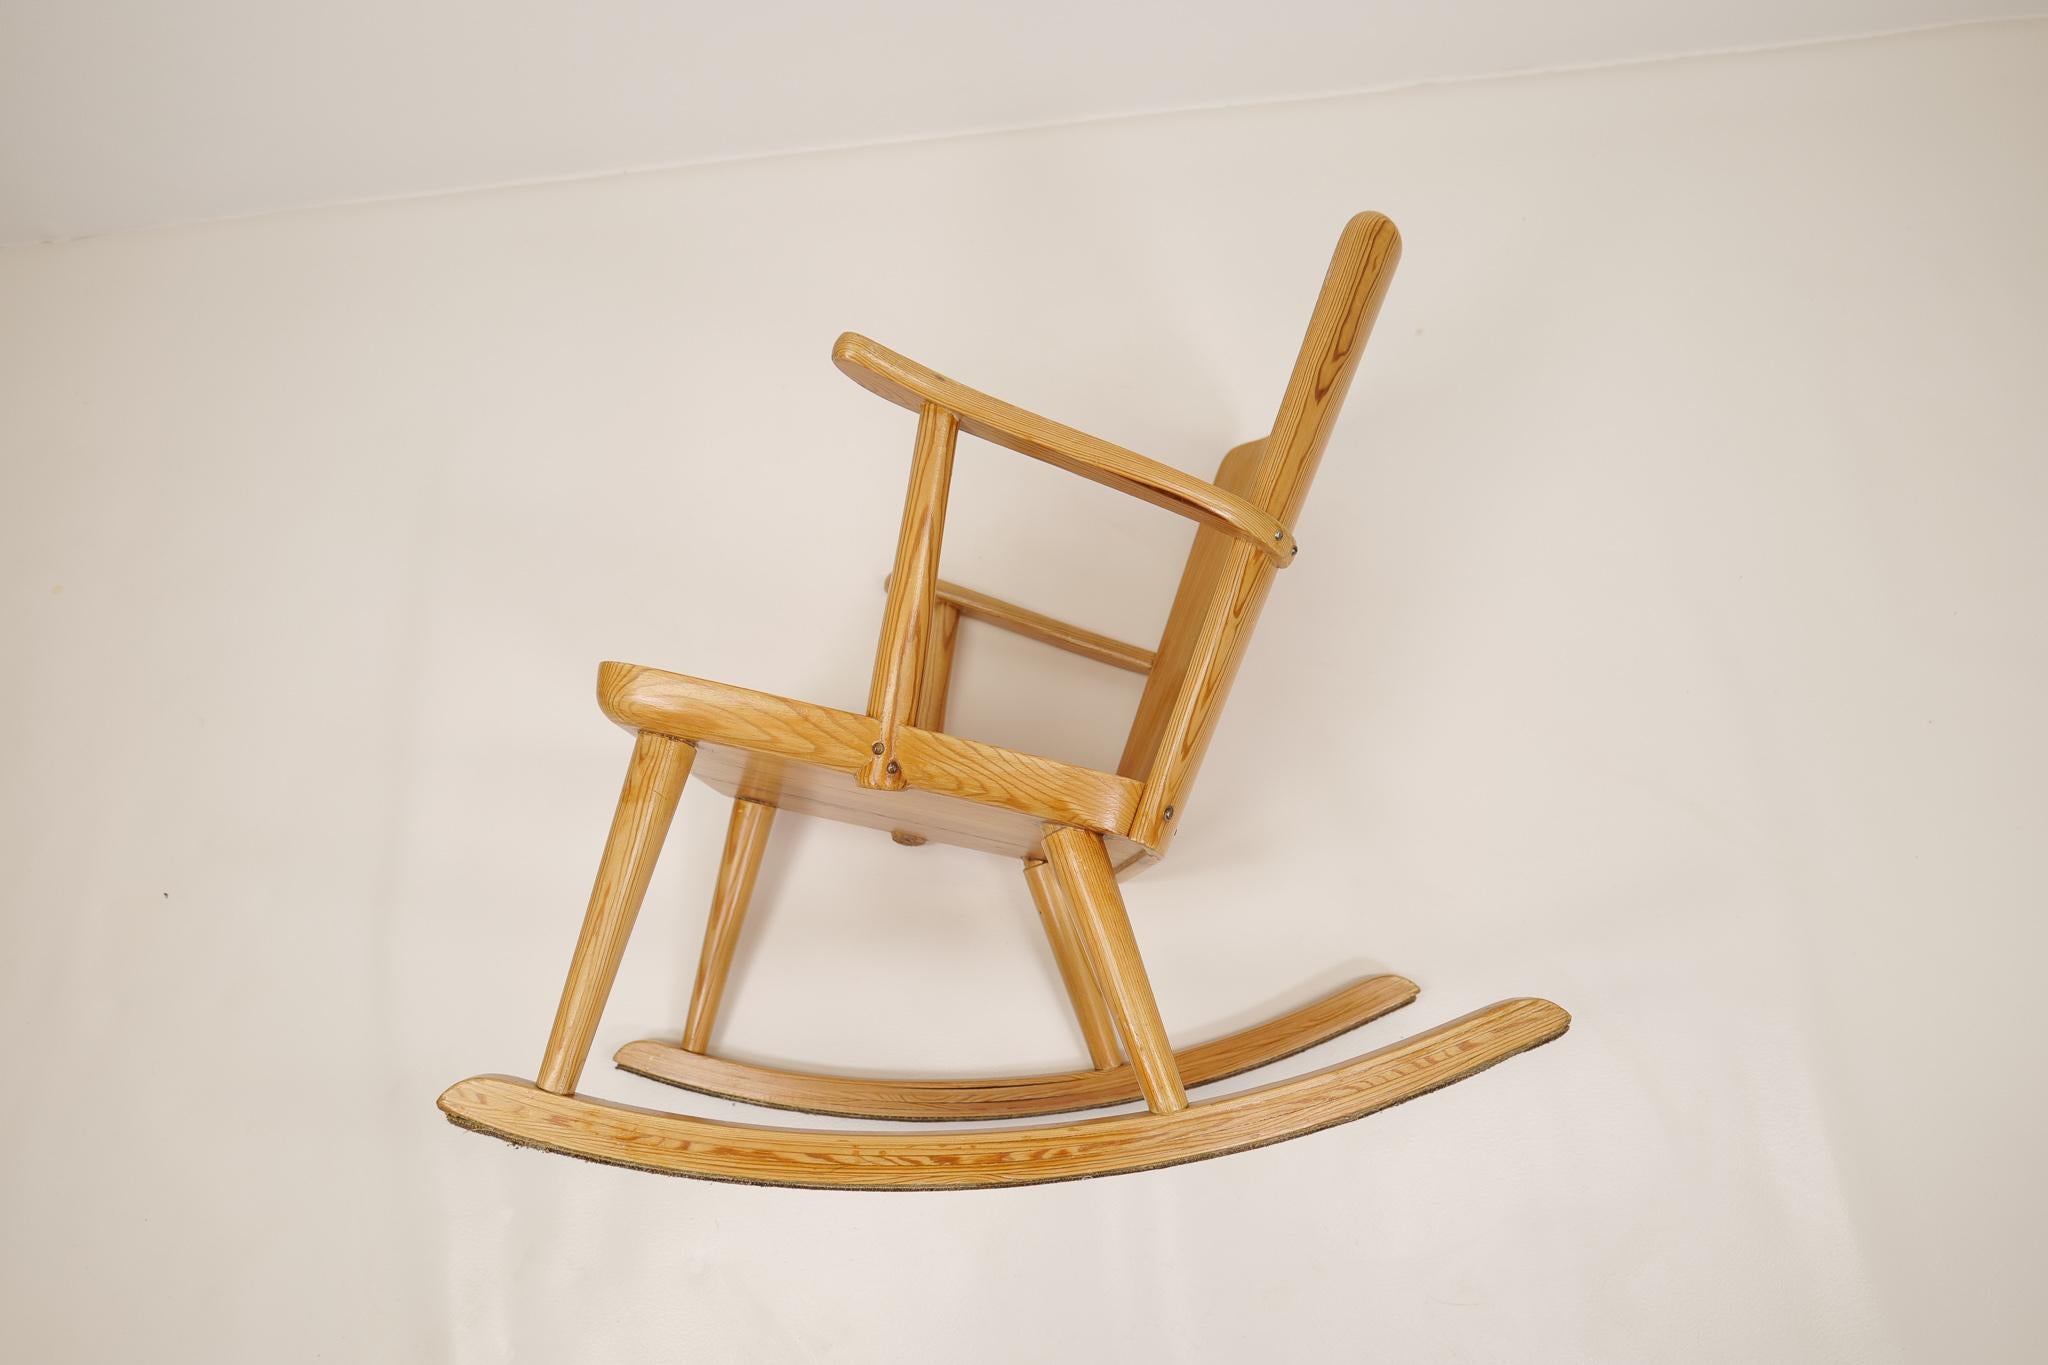 Midcentury Rocking Chair in Pine, Göran Malmvall, Sweden, 1940s For Sale 7